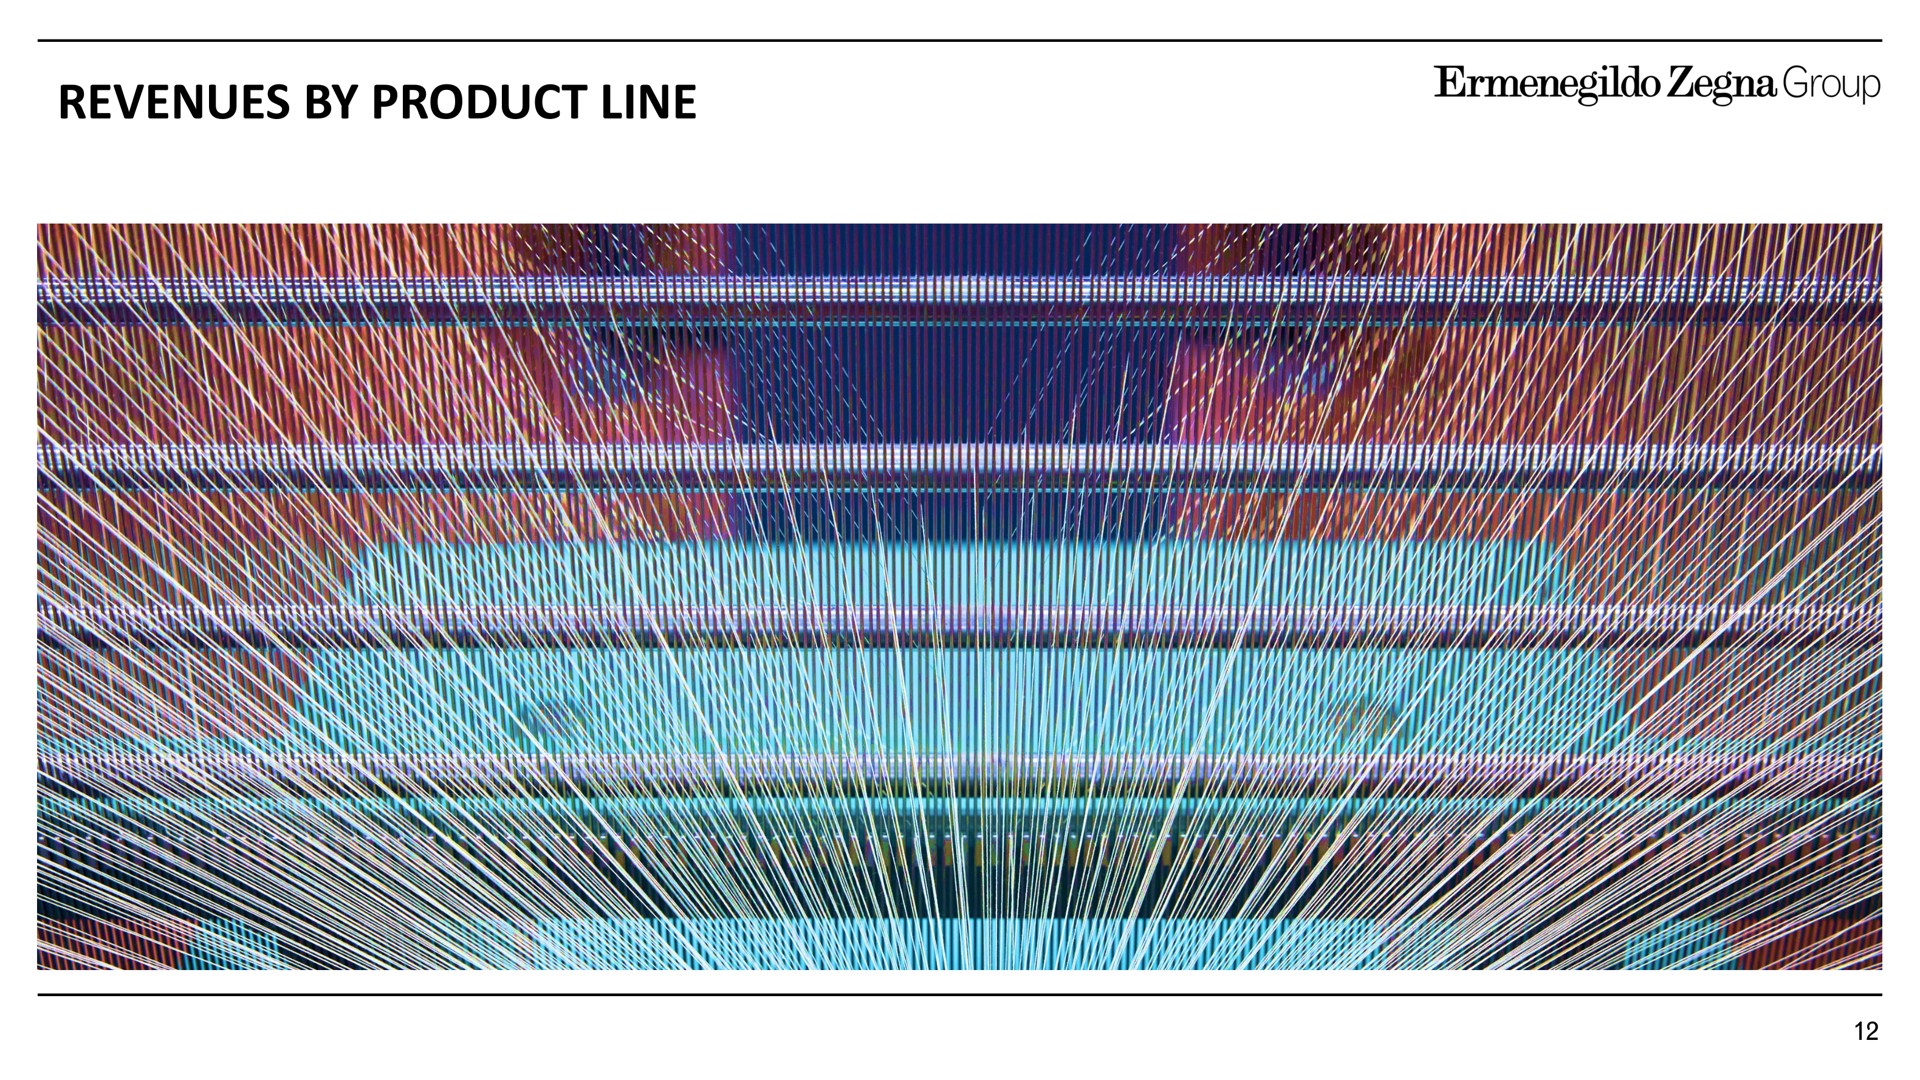 revenues by product line group an wali sie i i will an i | Zegna